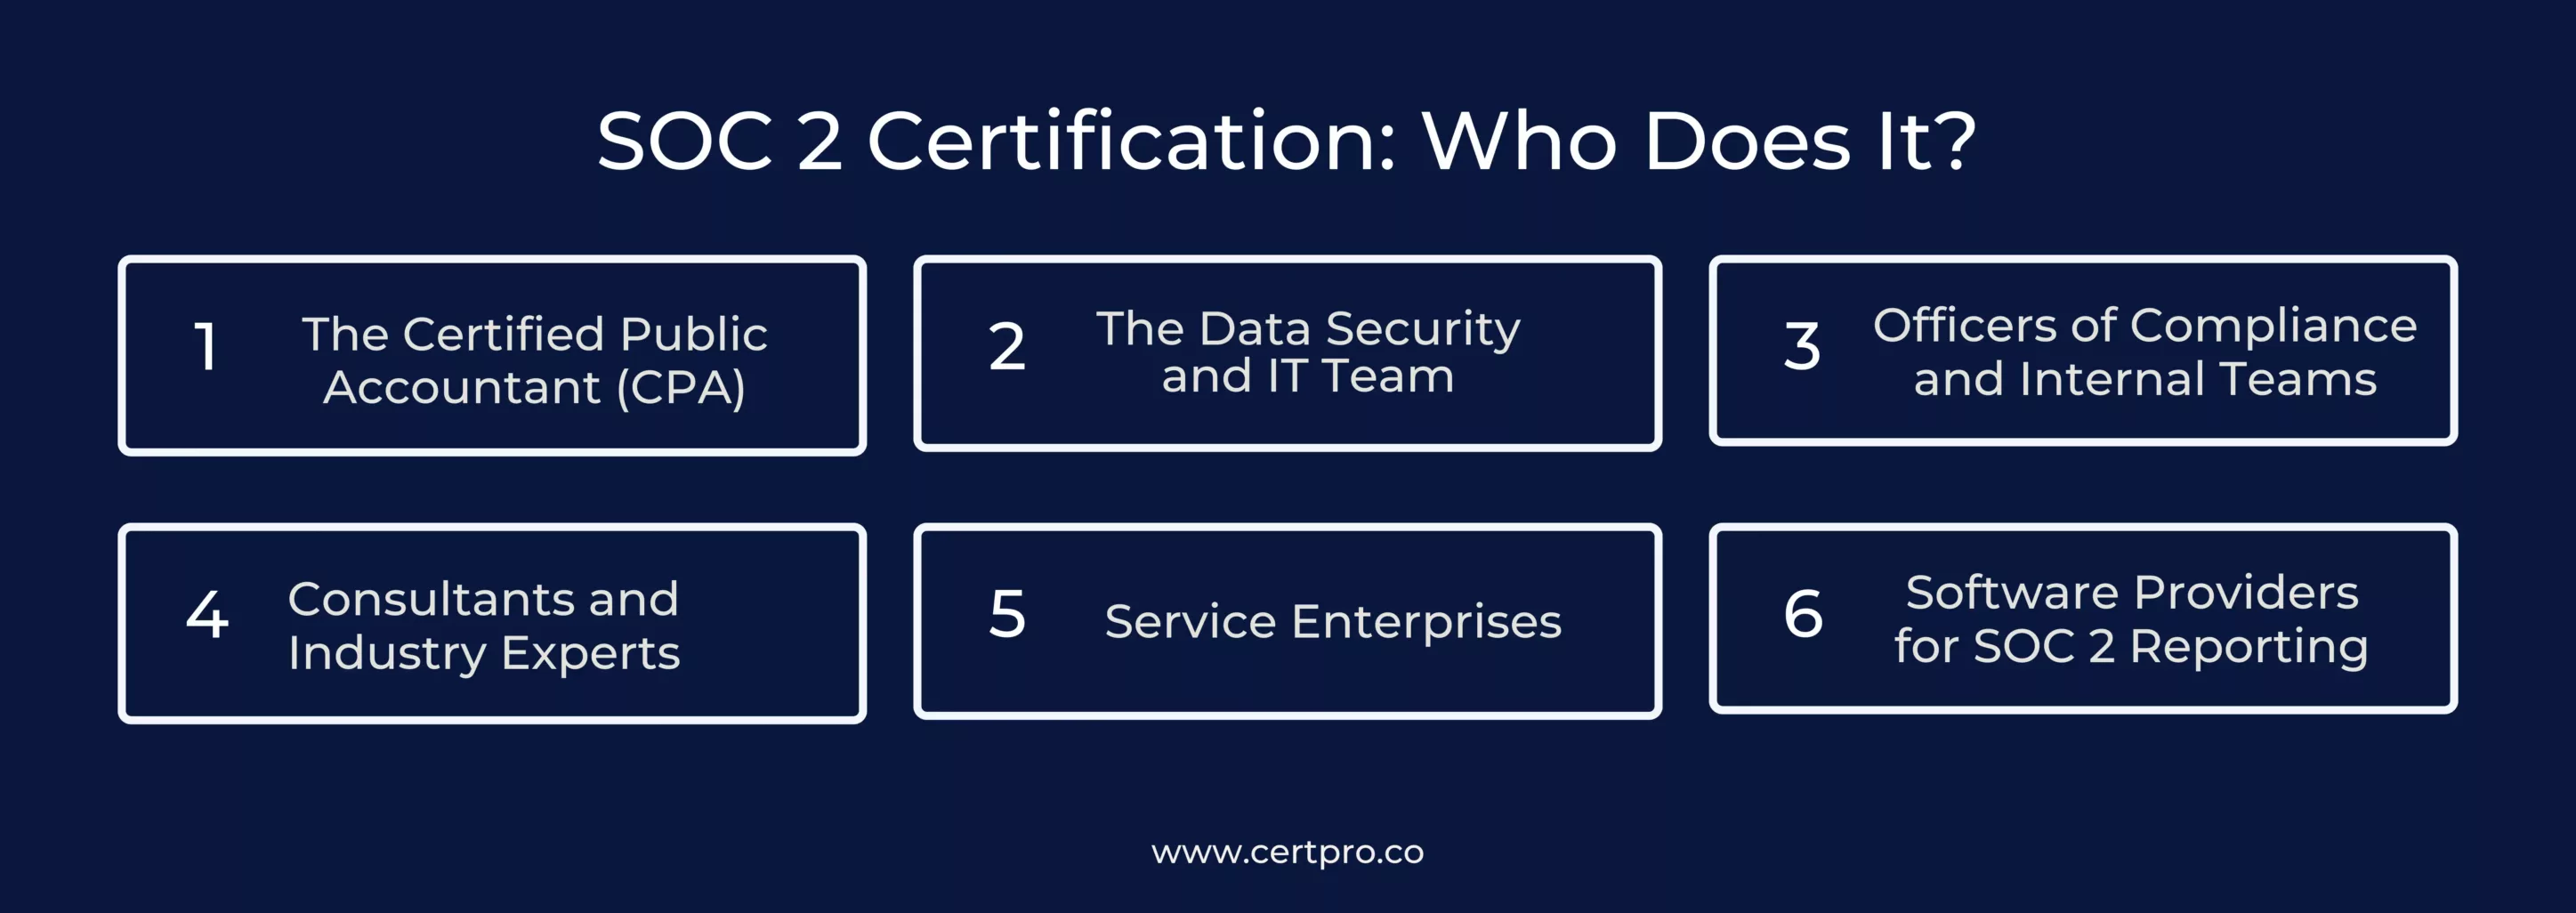 SOC 2 CERTIFICATION WHO DOES IT